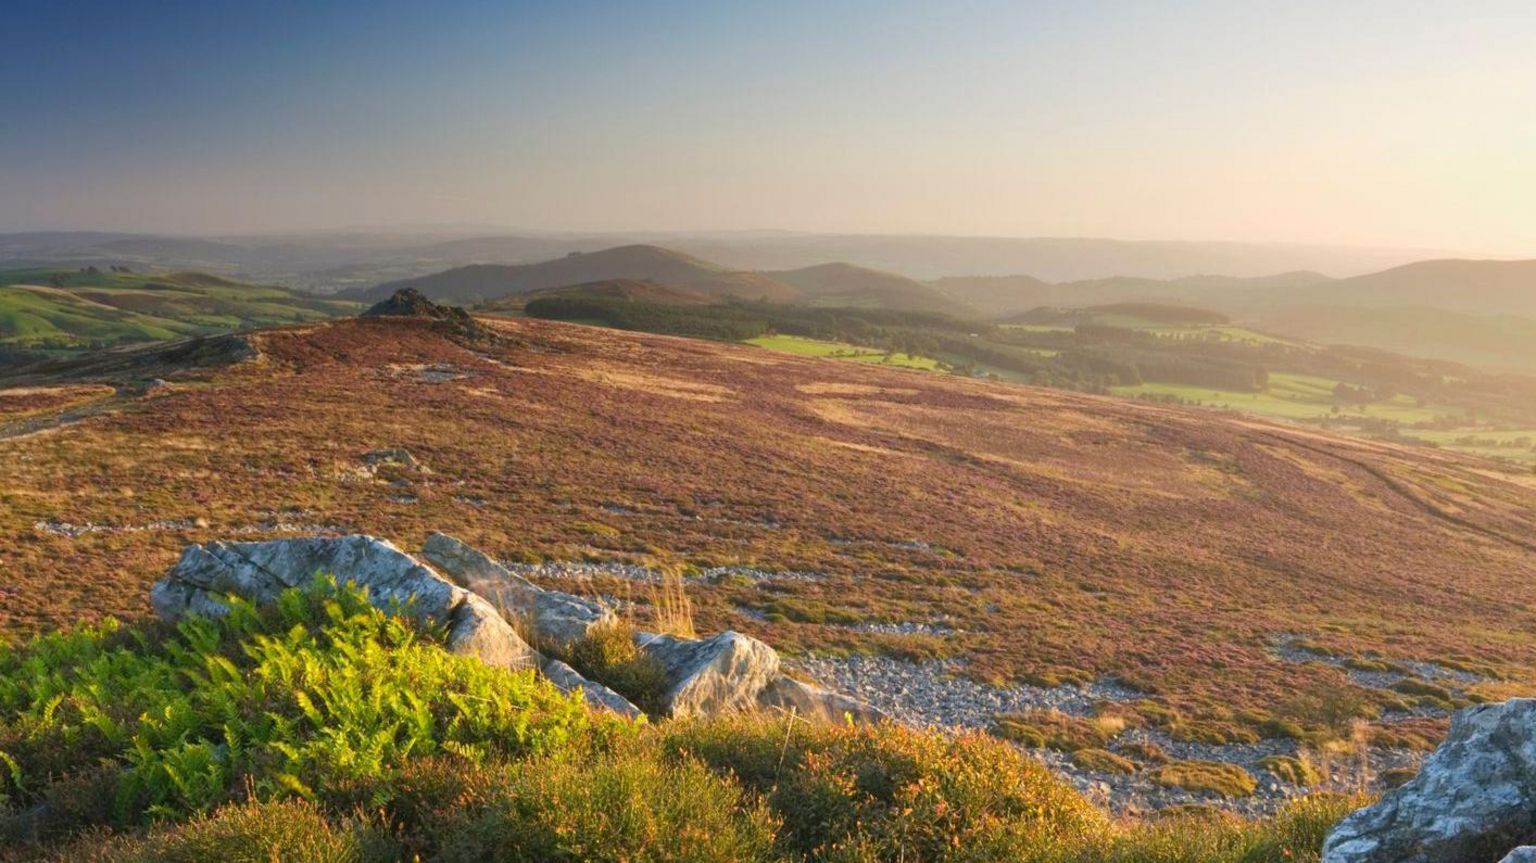 The Stiperstones nature reserve